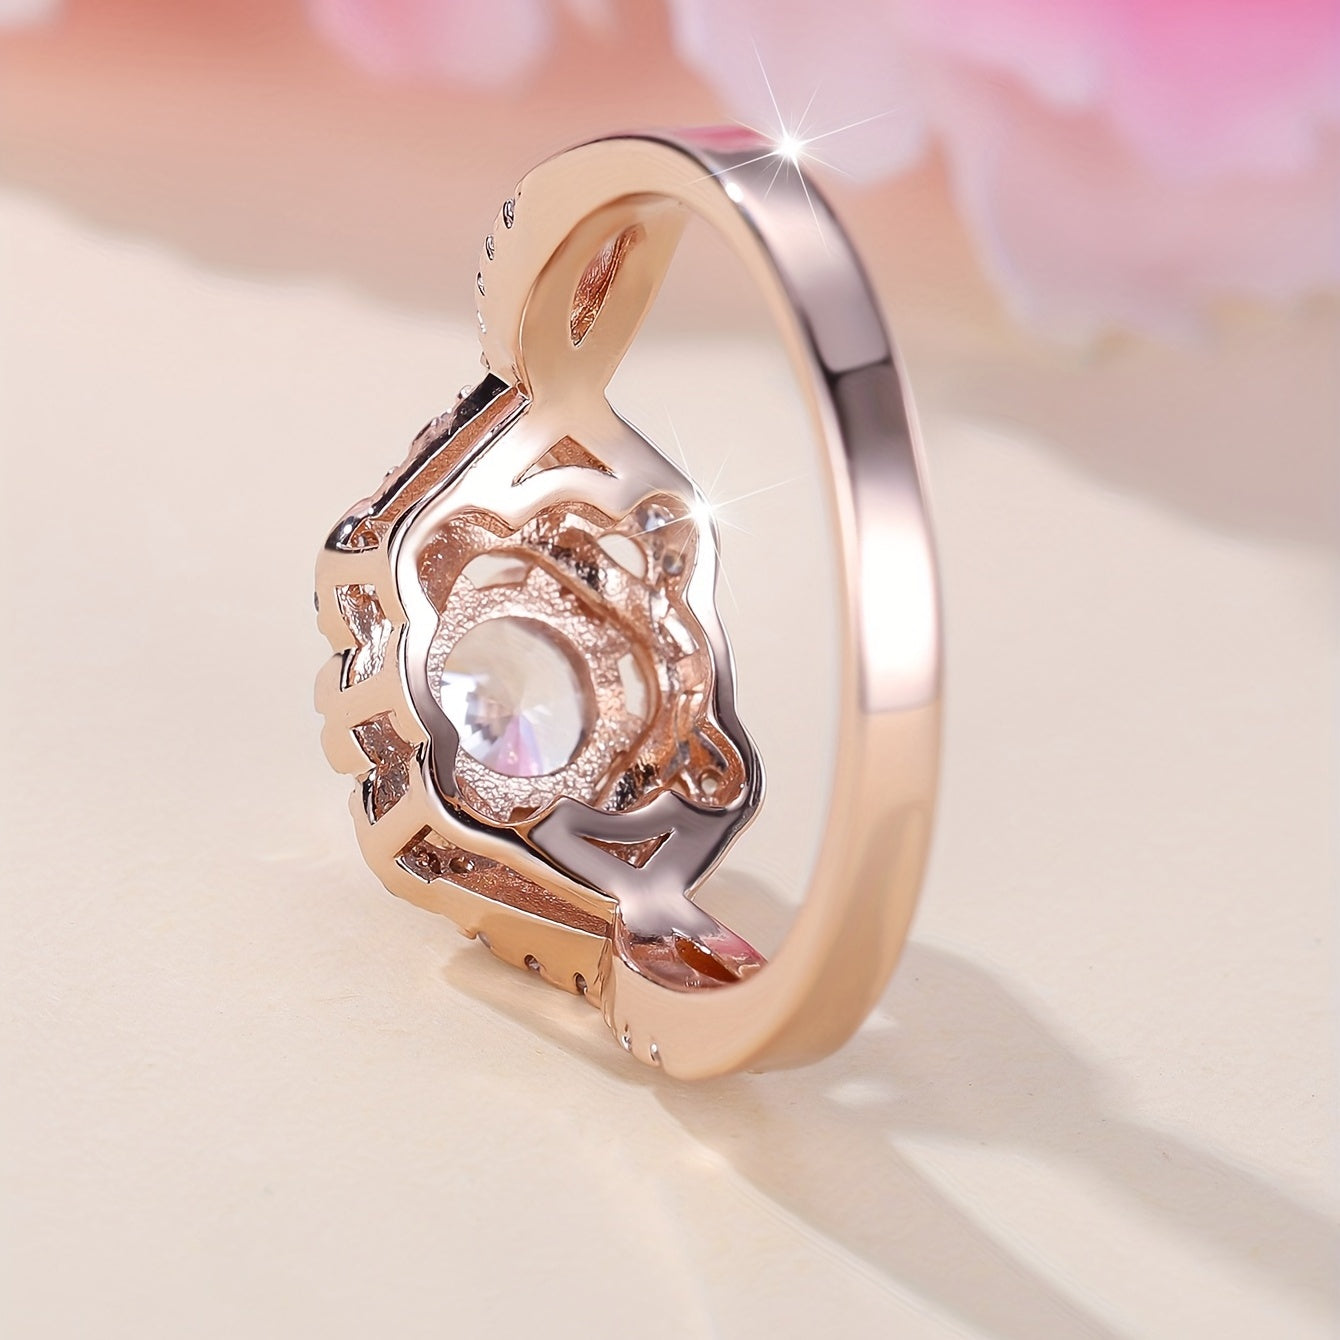 Luxury Ring Inlaid Shining Zircon Engagement Wedding Jewelry For Female Perfect Evening Party Decor Multi Sizes To Choose